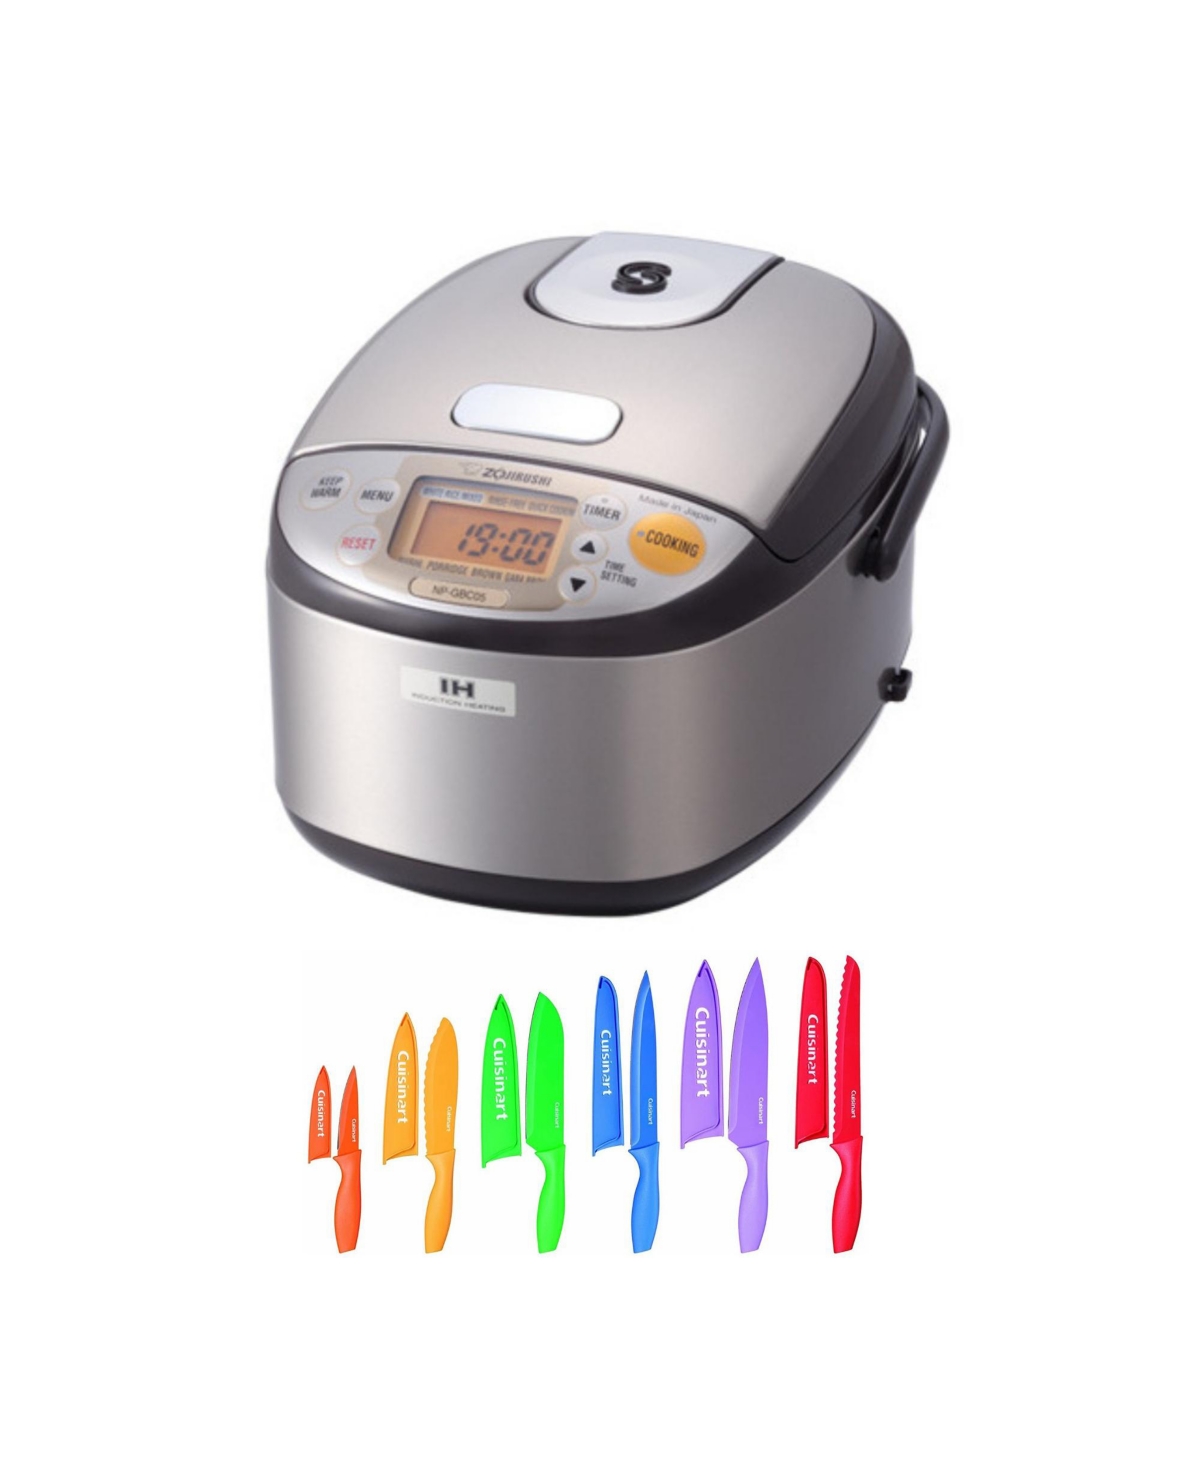 UPC 196271001348 product image for Zojirushi Induction Heating, Rice Cooker, And Warmer, 3-Cup With 12-Knife Set | upcitemdb.com